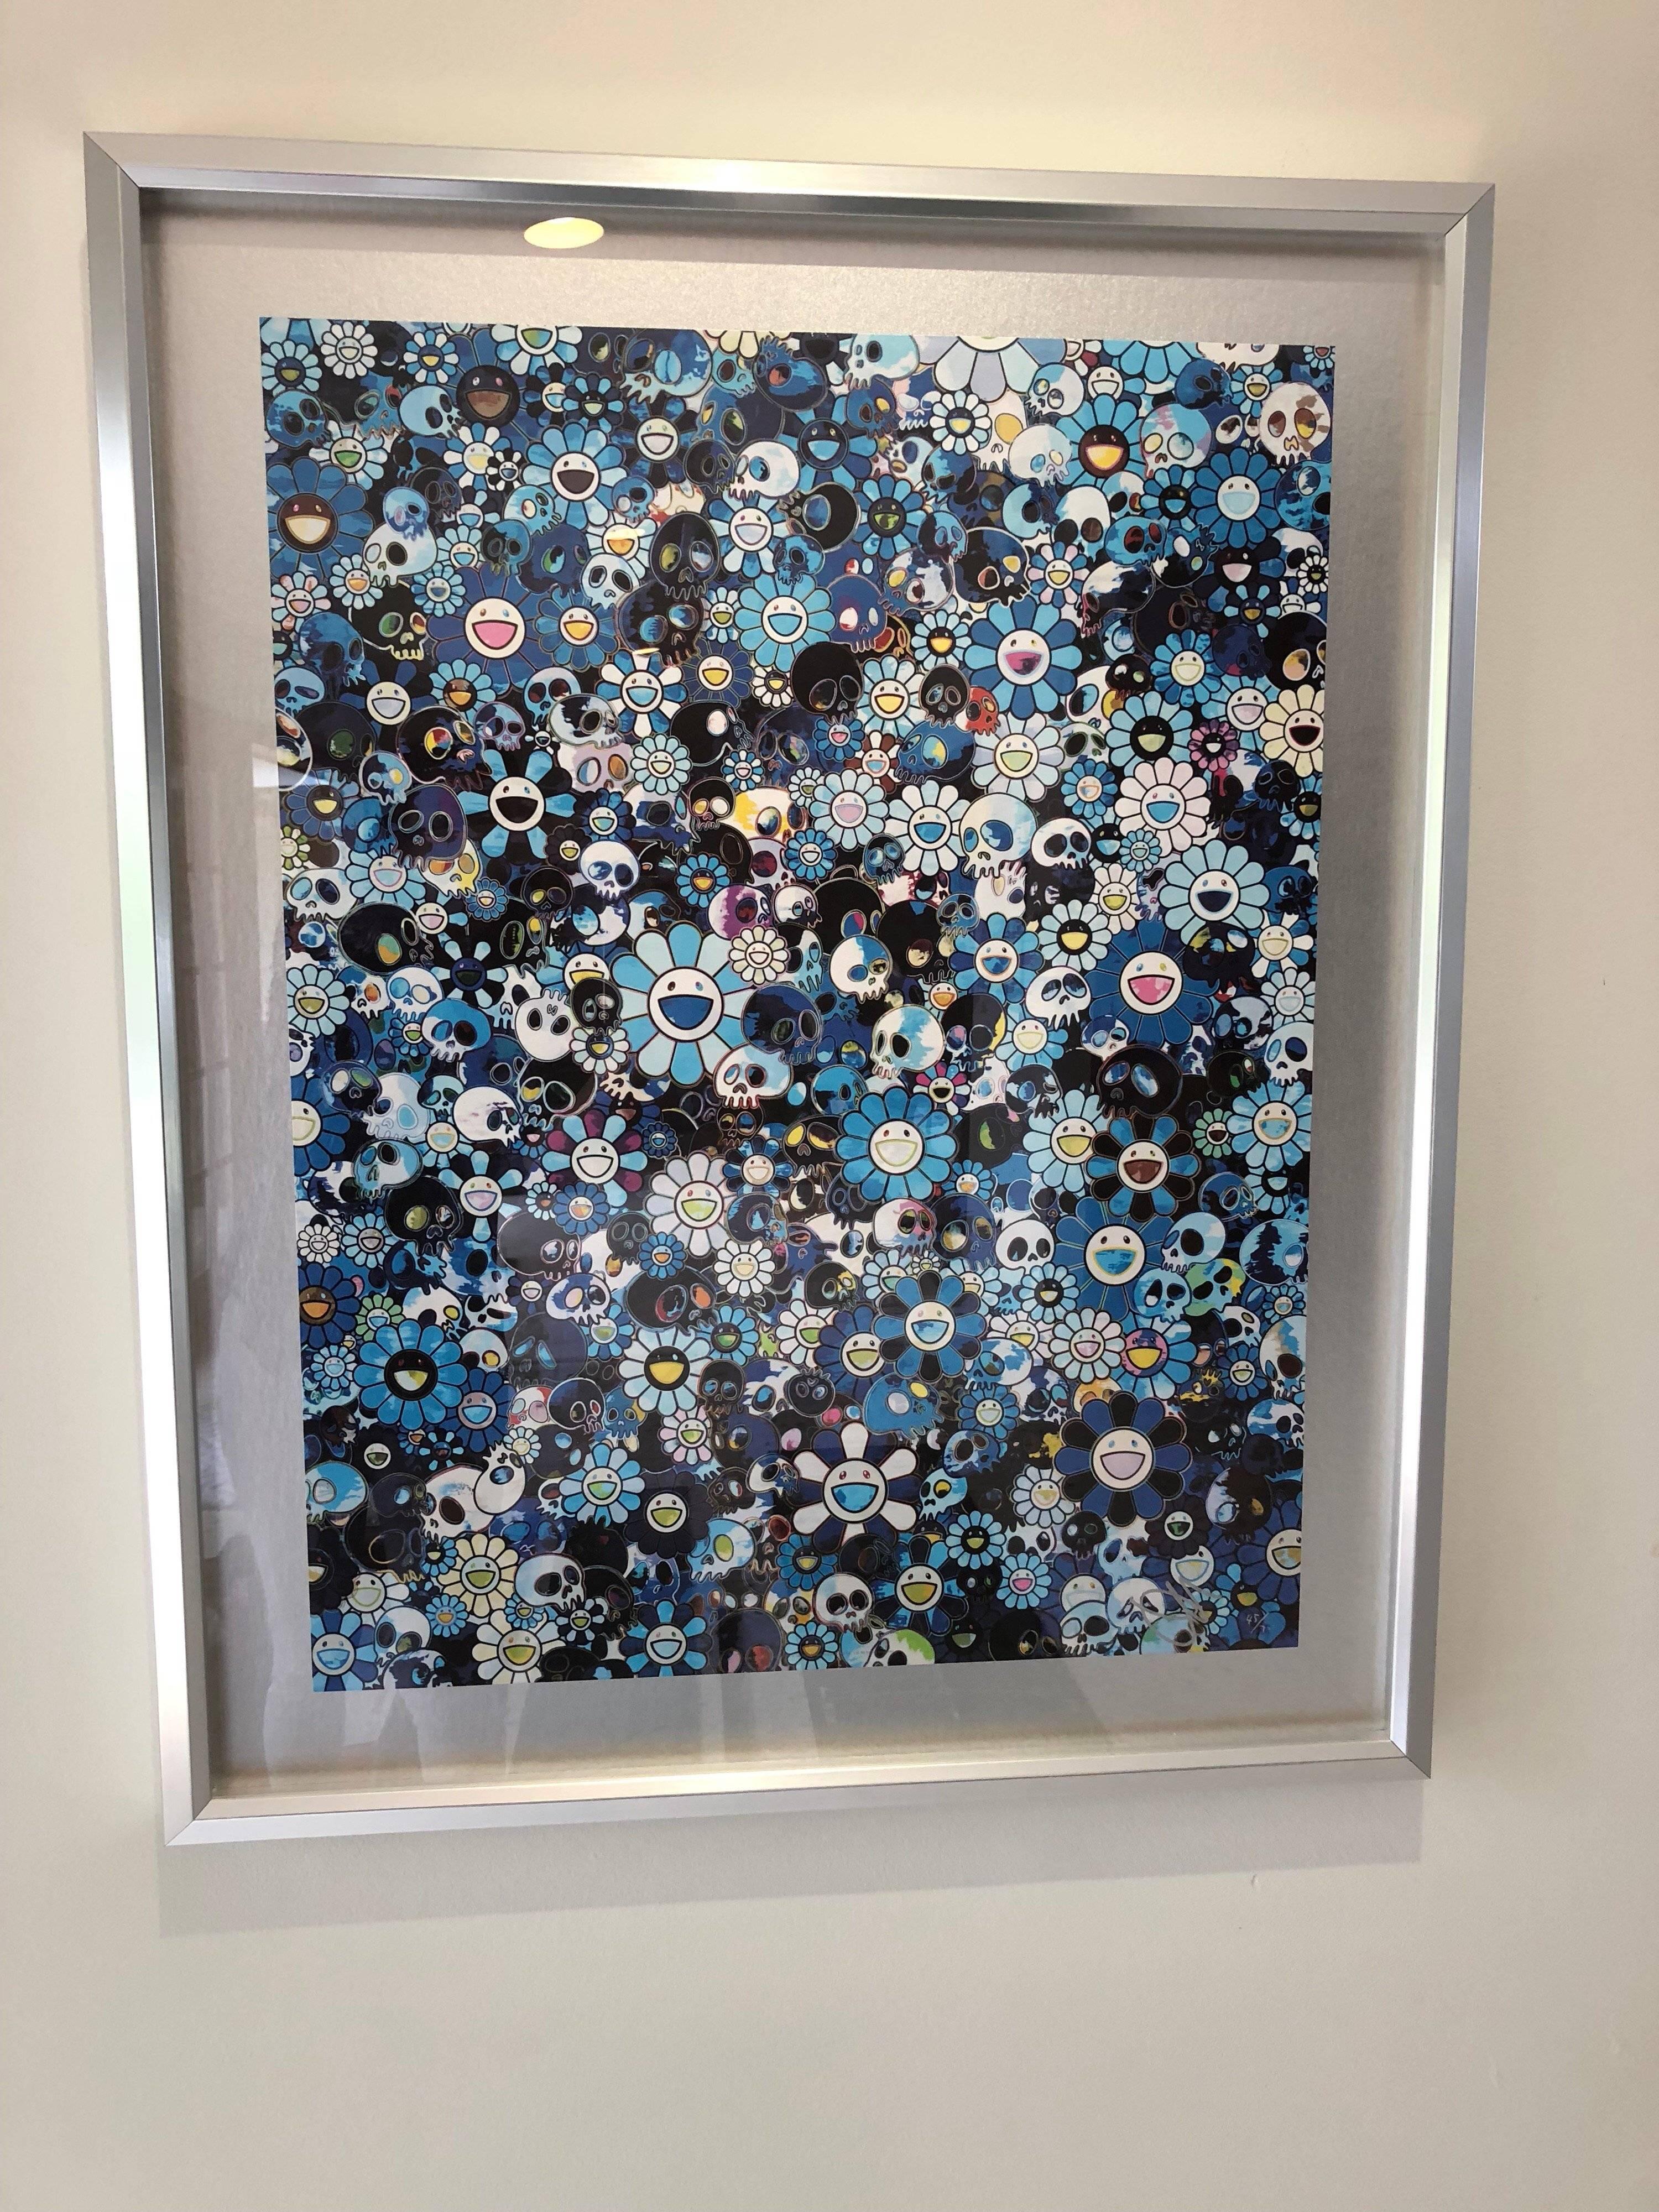 Takashi Murakami Figurative Print - Offset print with Flowers and Skulls in blue, sold framed